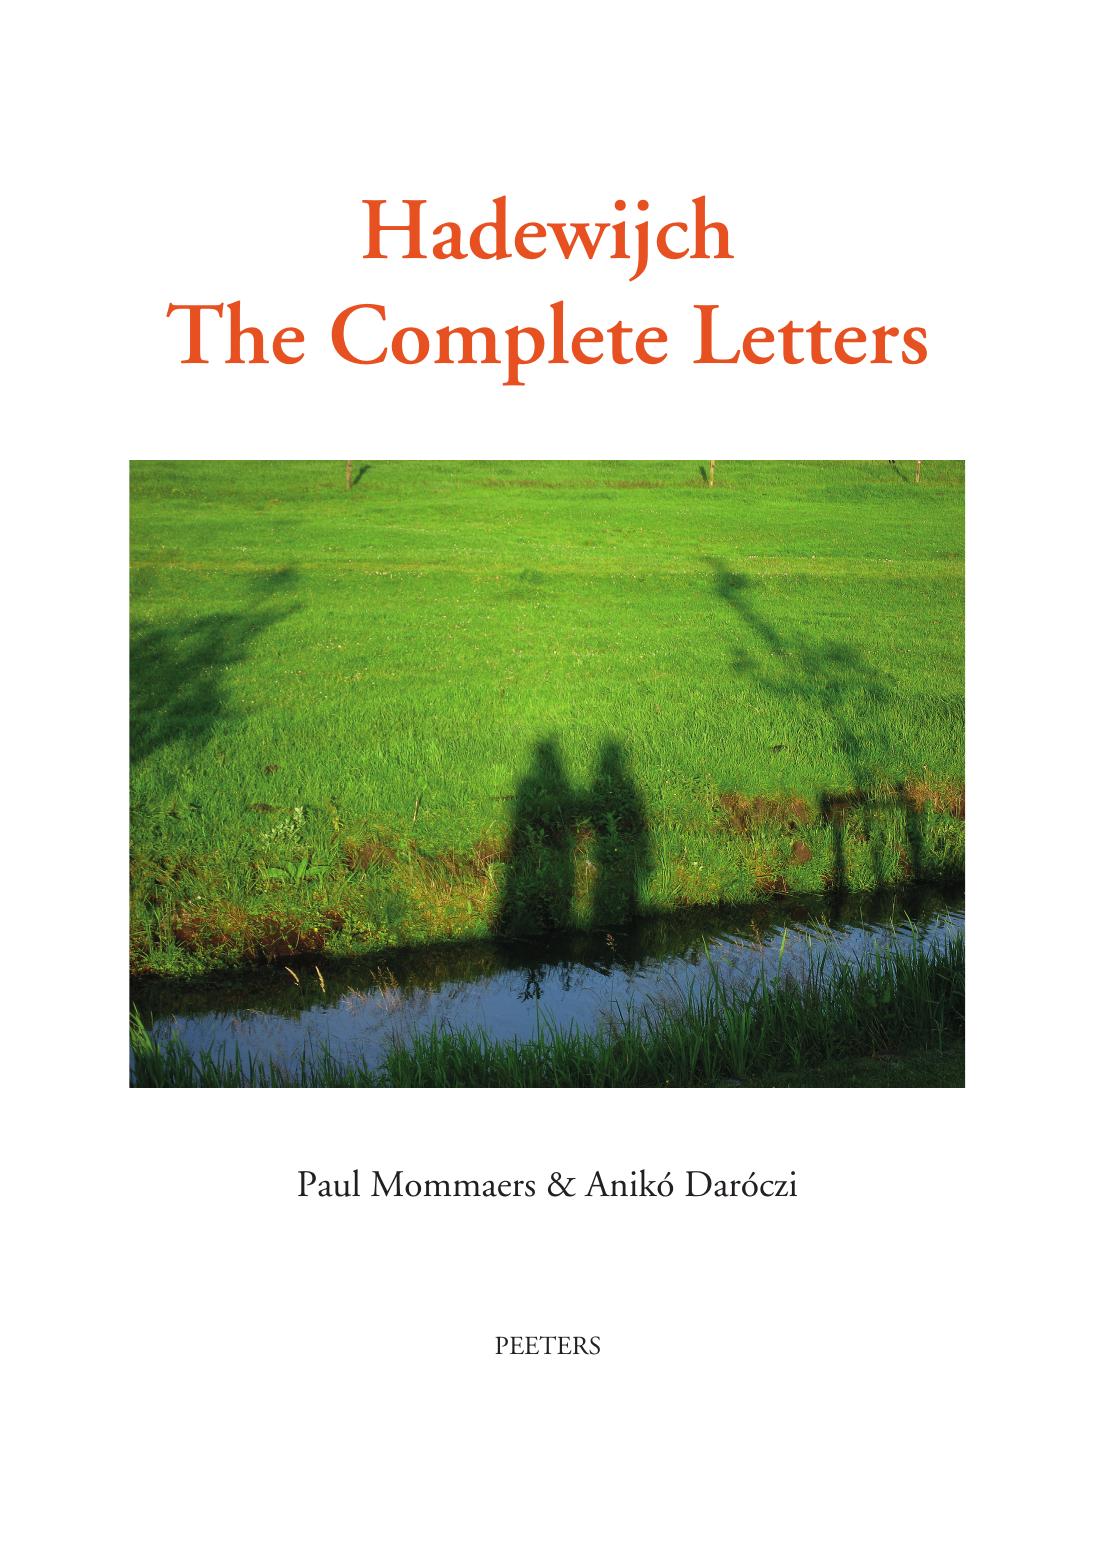 Hadewijch. the Complete Letters: Middle Dutch Text by P Mommaers A Daroczi